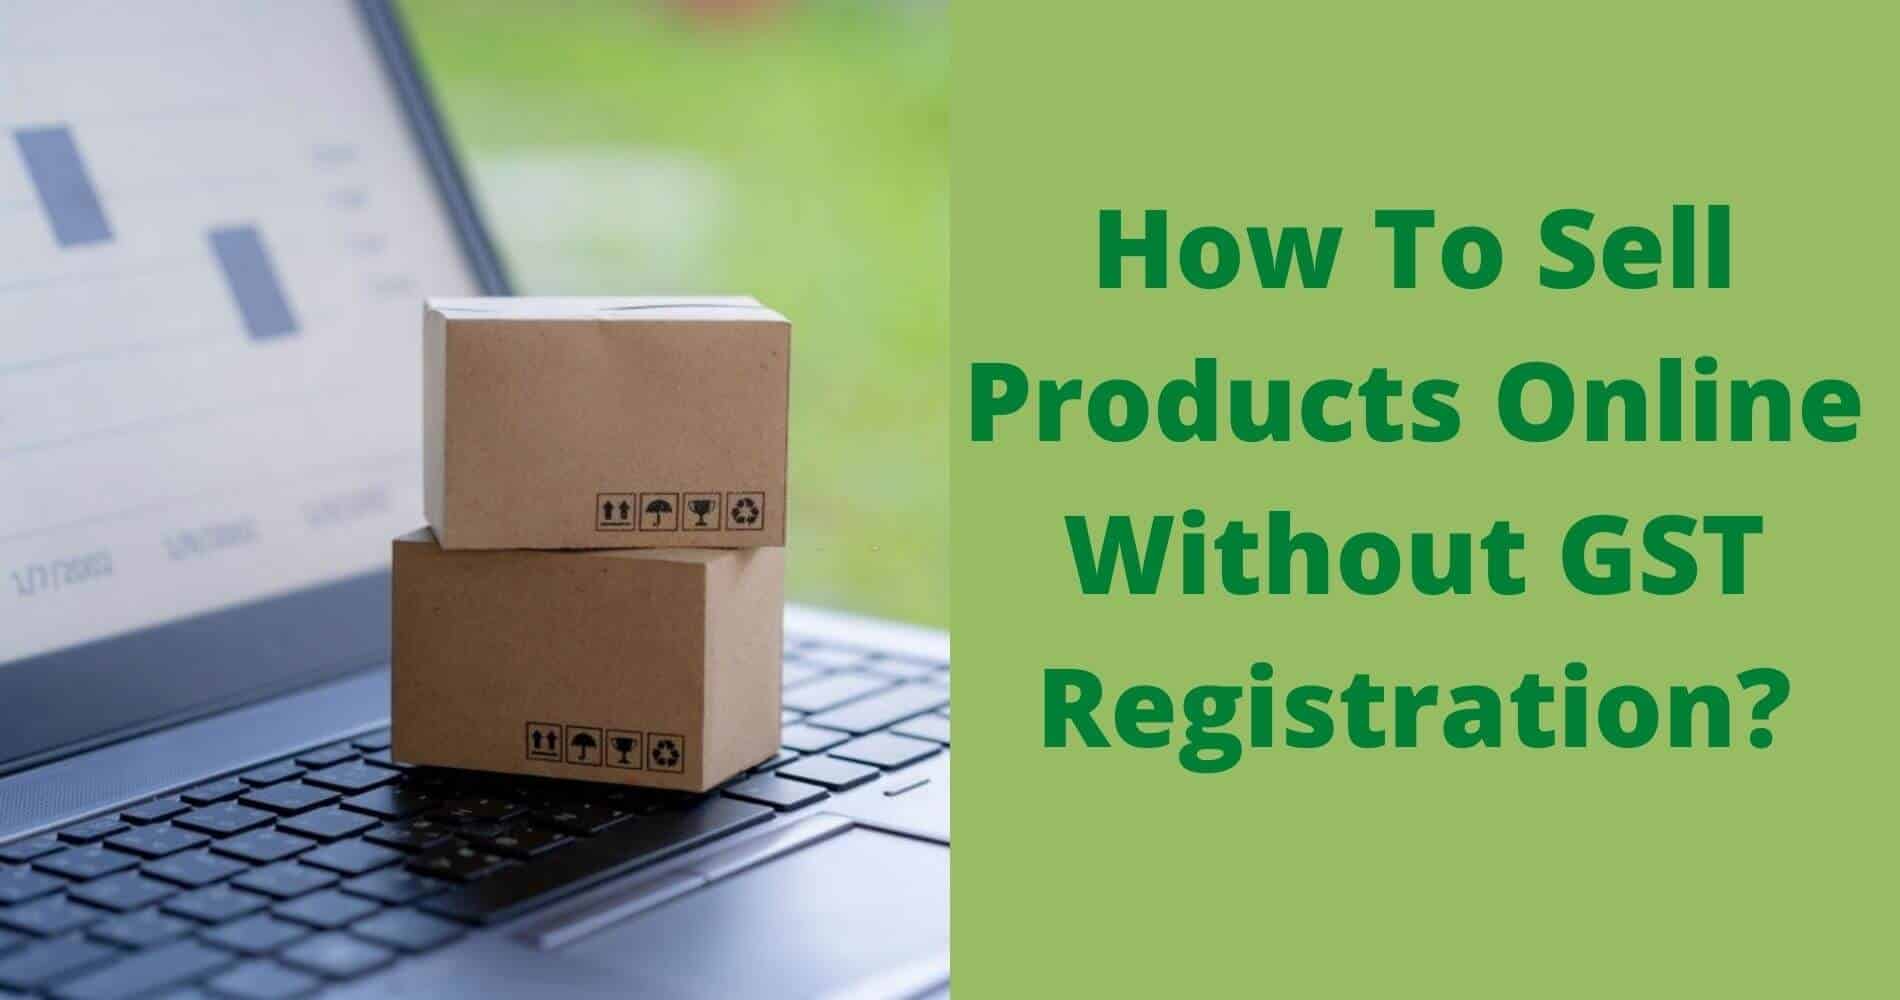 Sell Products Online